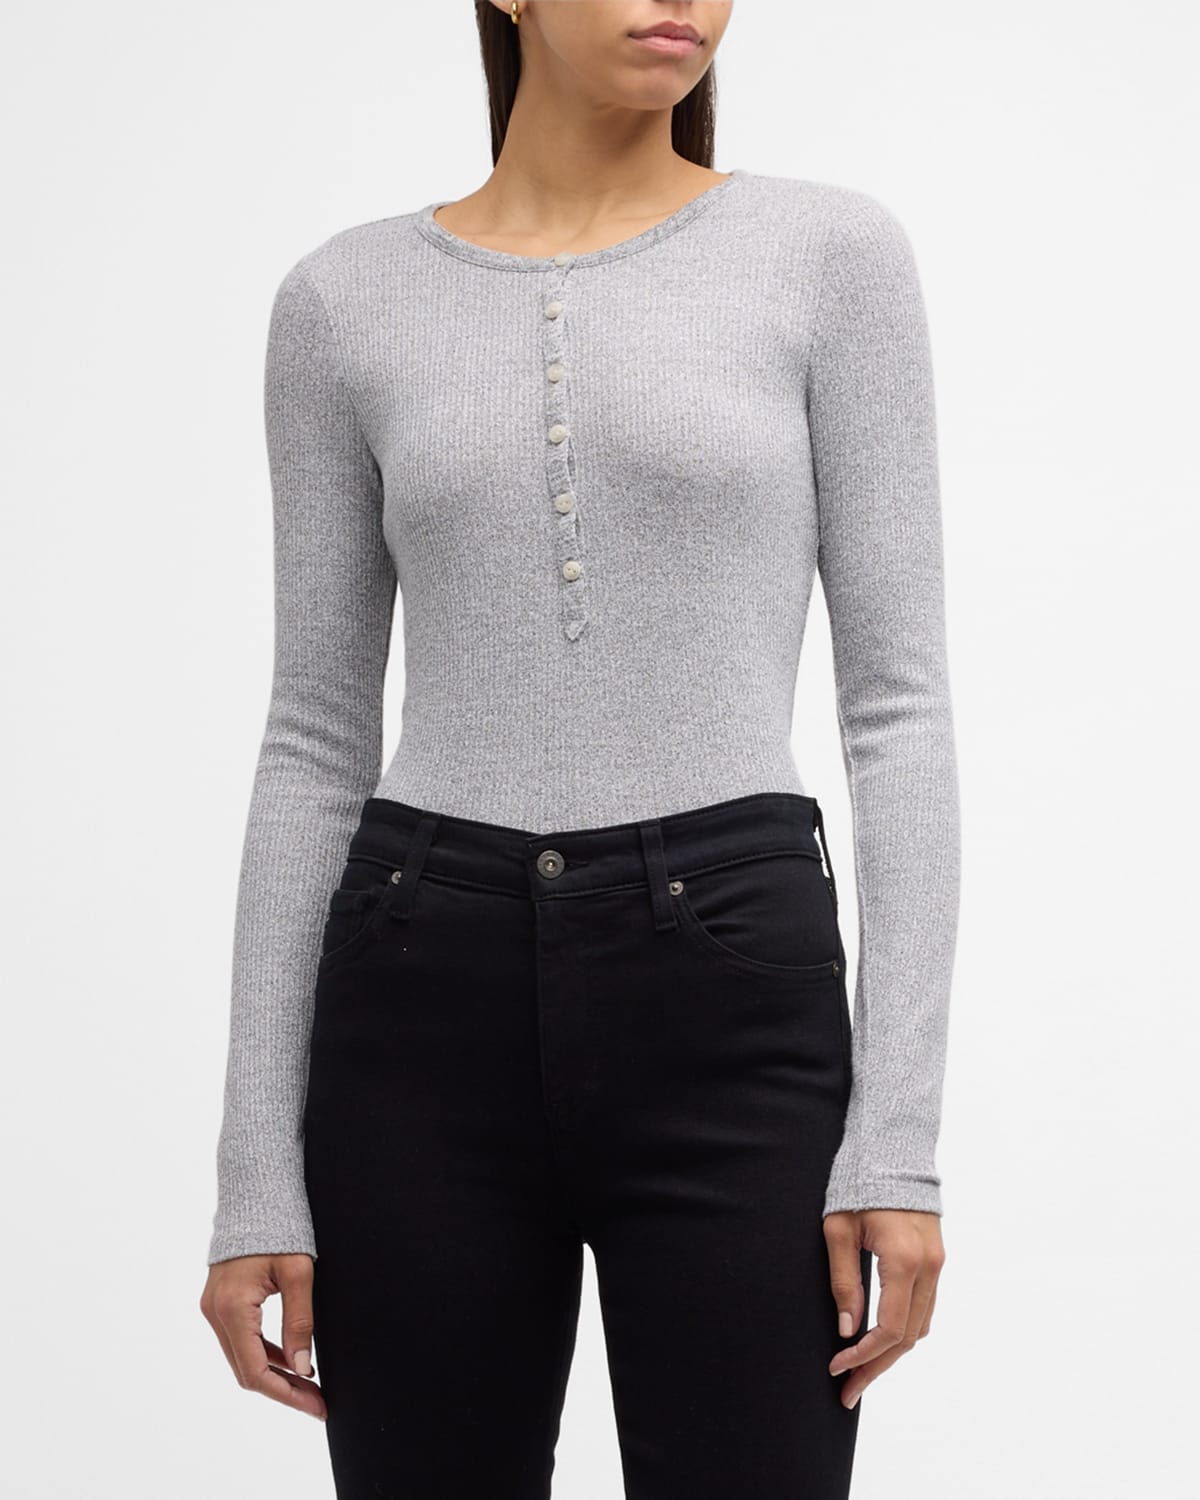 The Knit-Rib Henley Top